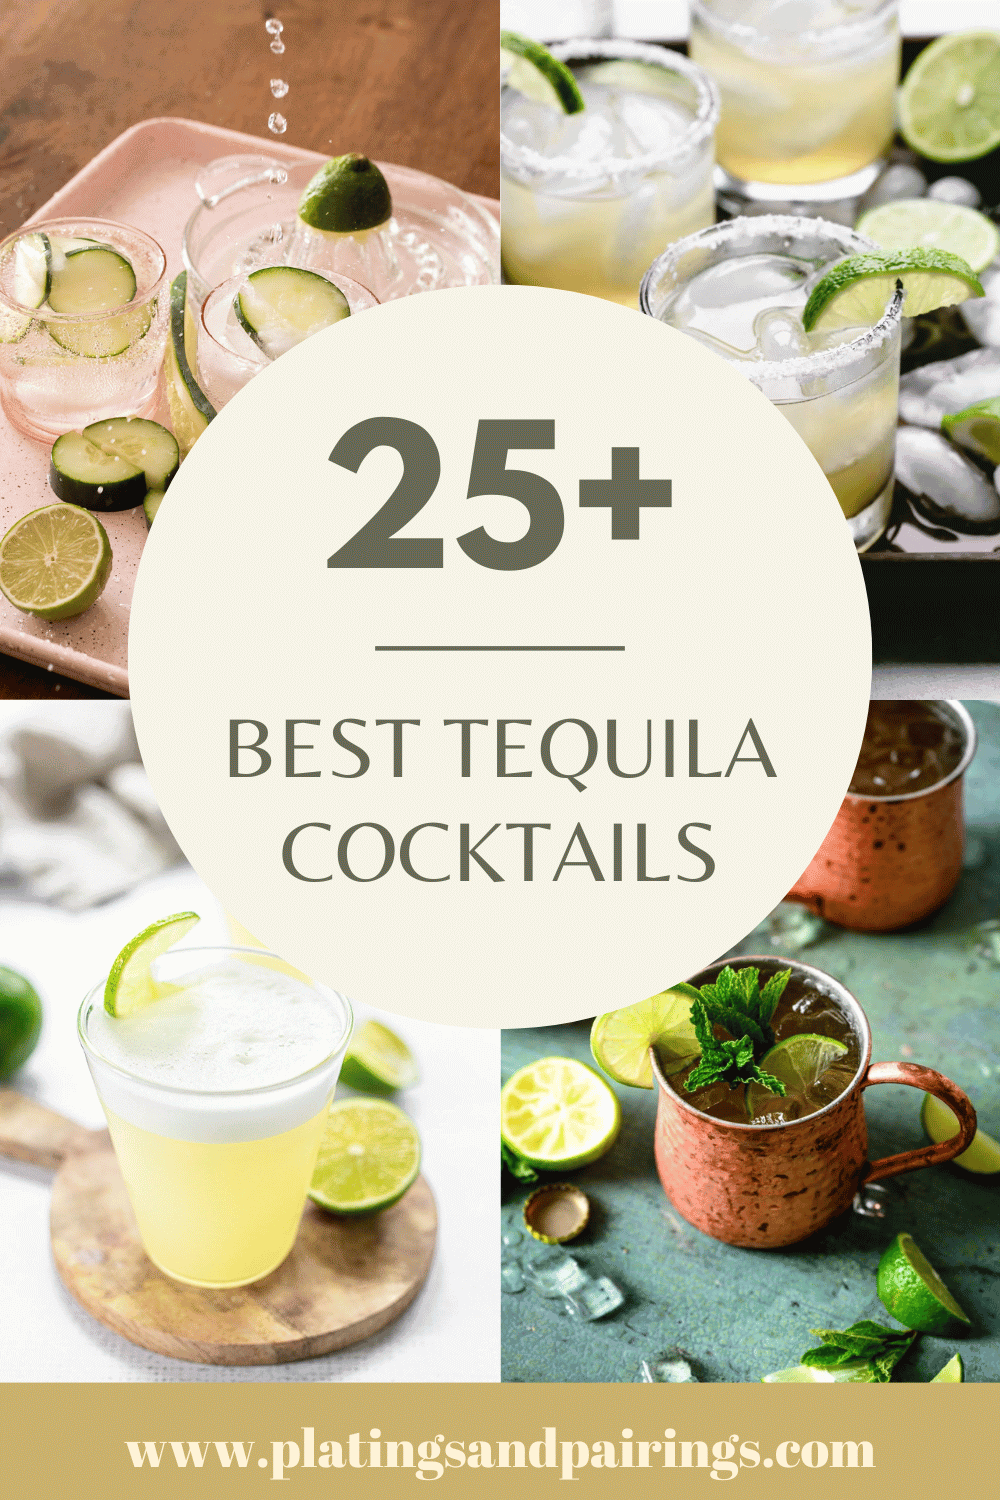 Collage of tequila cocktails with text overlay.